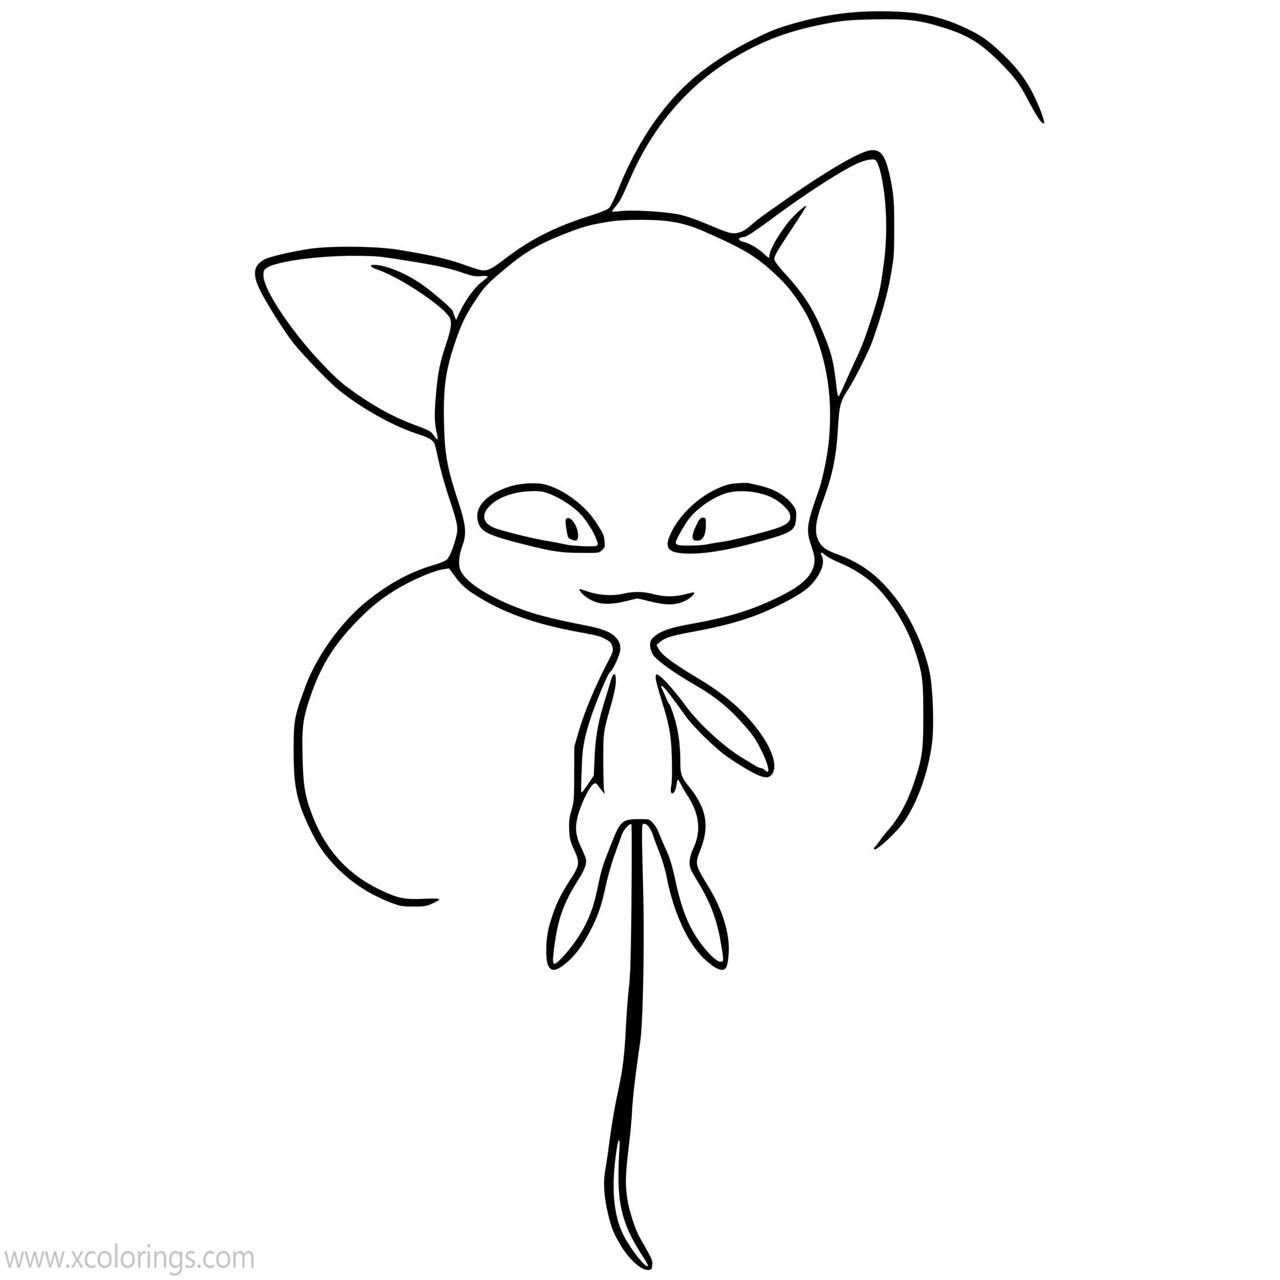 Free Kwami Plagg from Miraculous Ladybug Coloring Pages printable